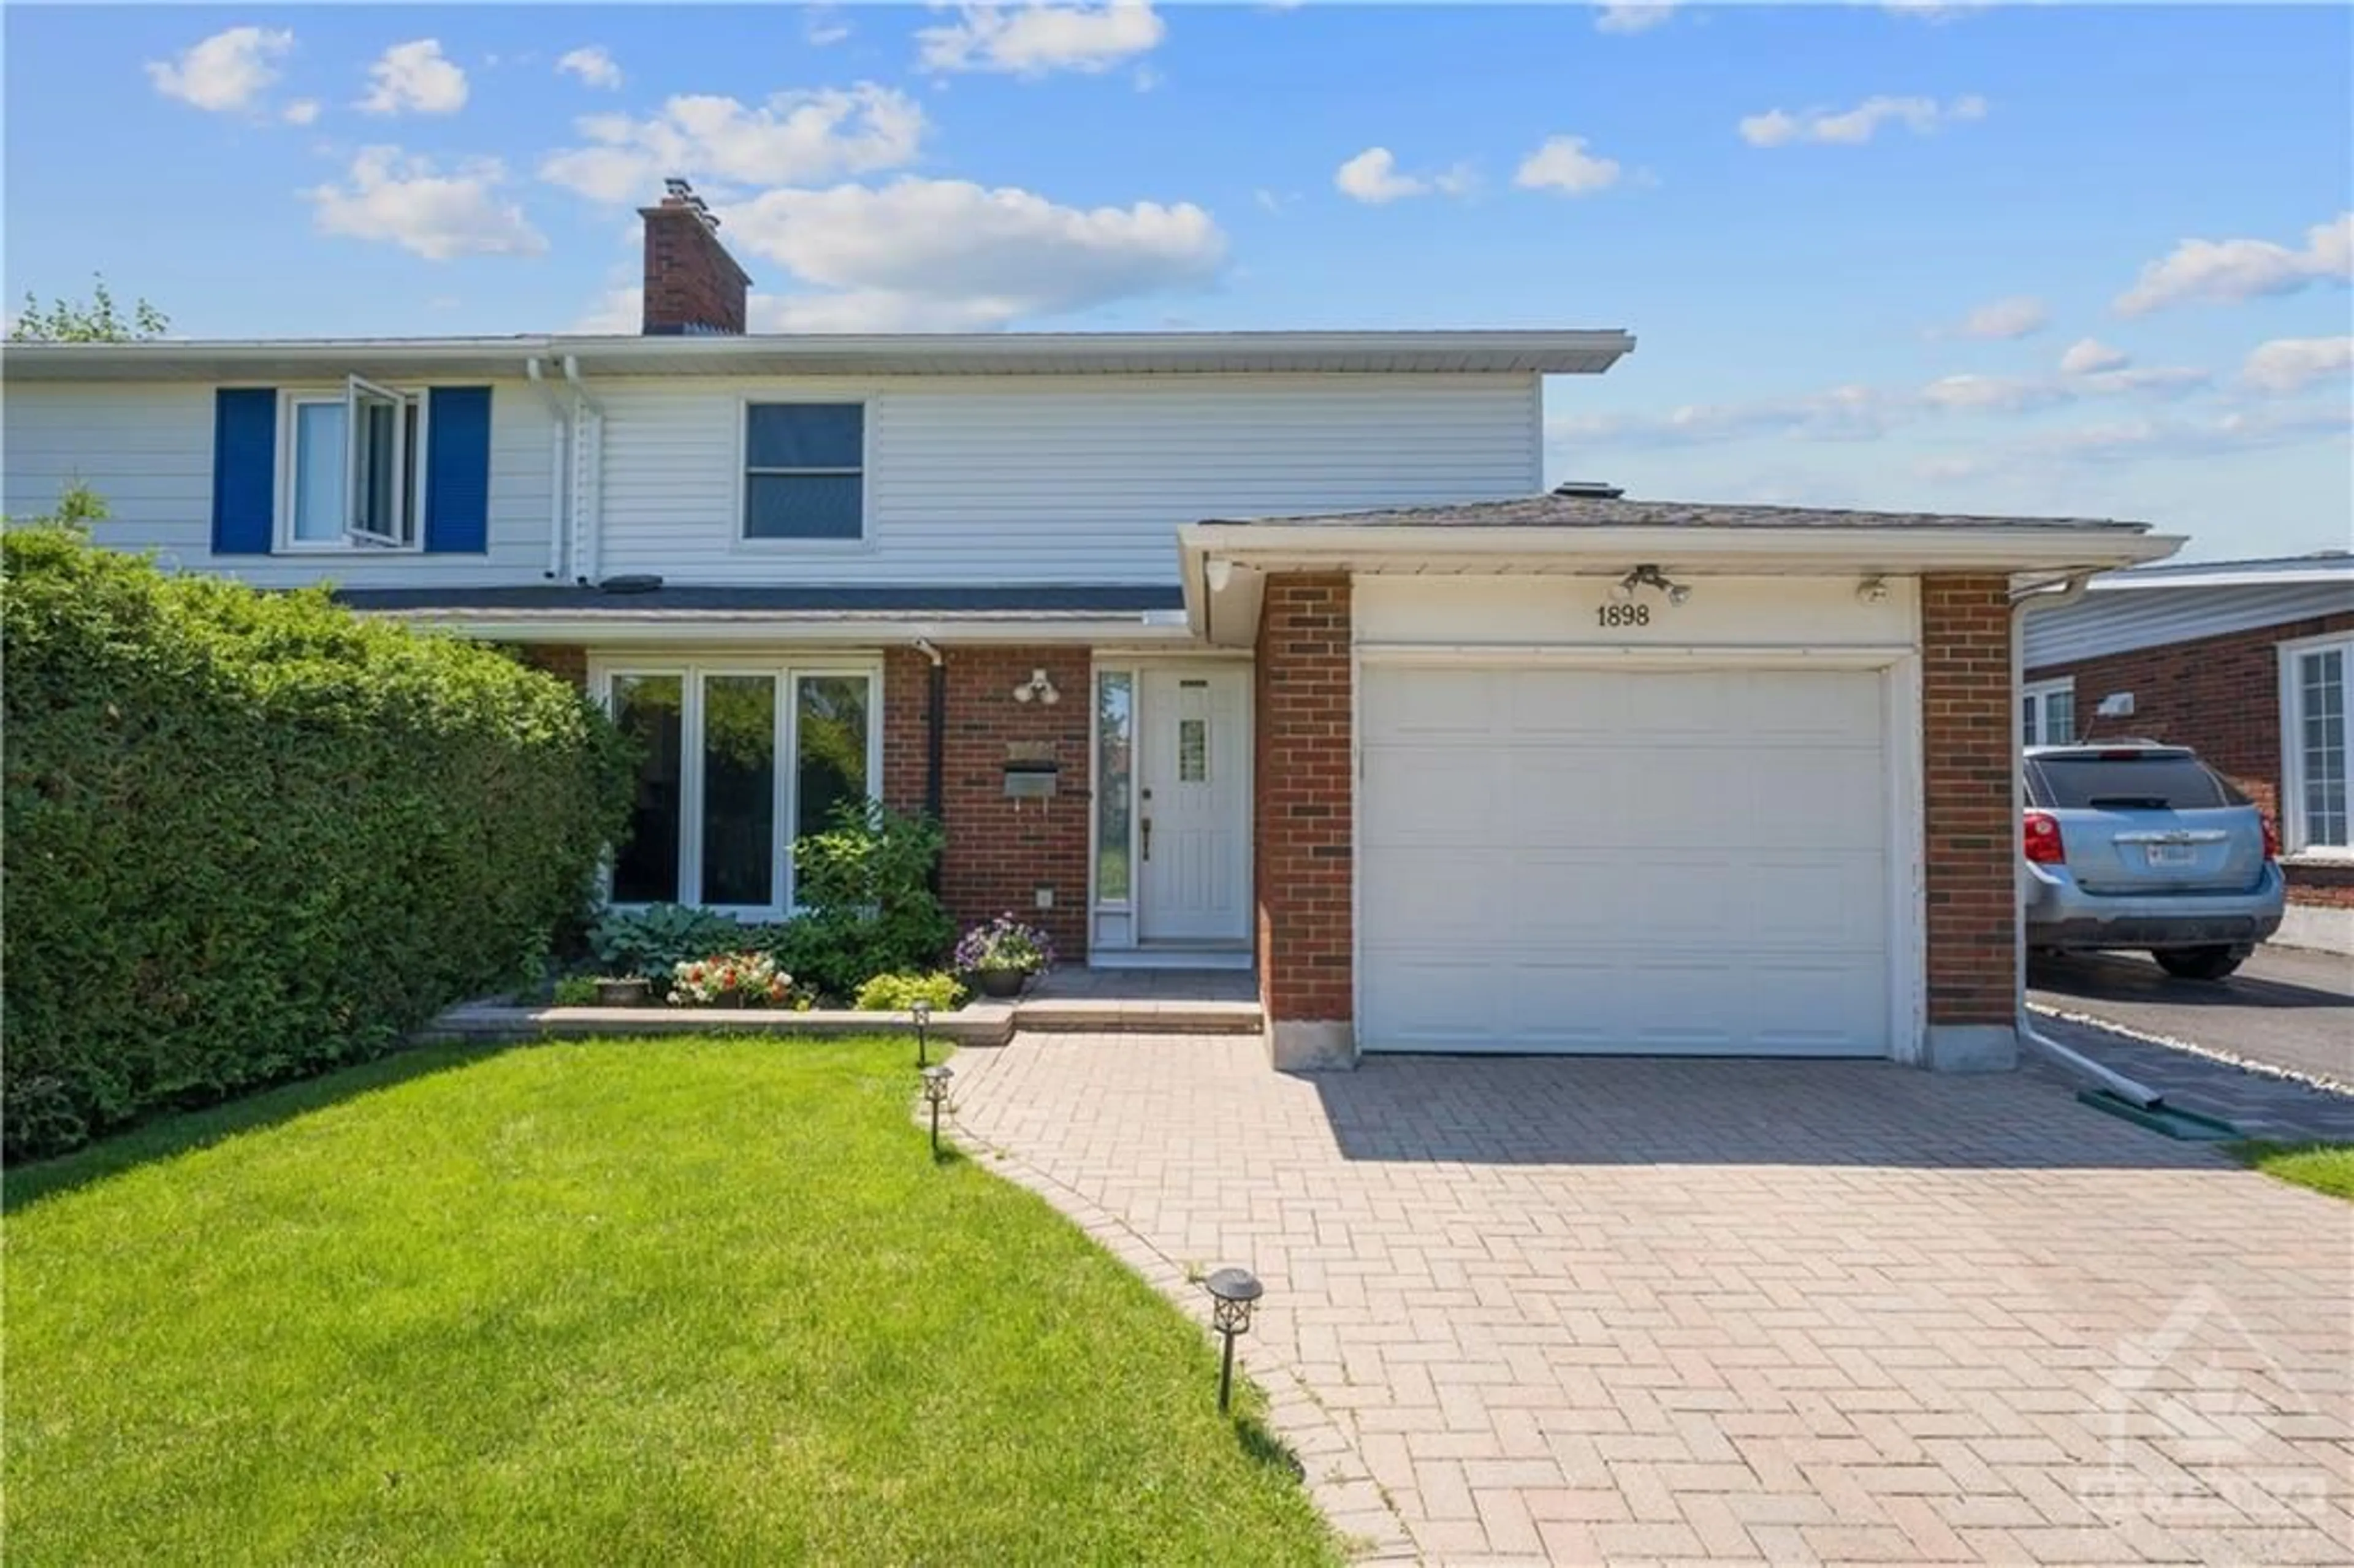 Home with brick exterior material for 1898 ELMRIDGE Dr, Ottawa Ontario K1J 6R7